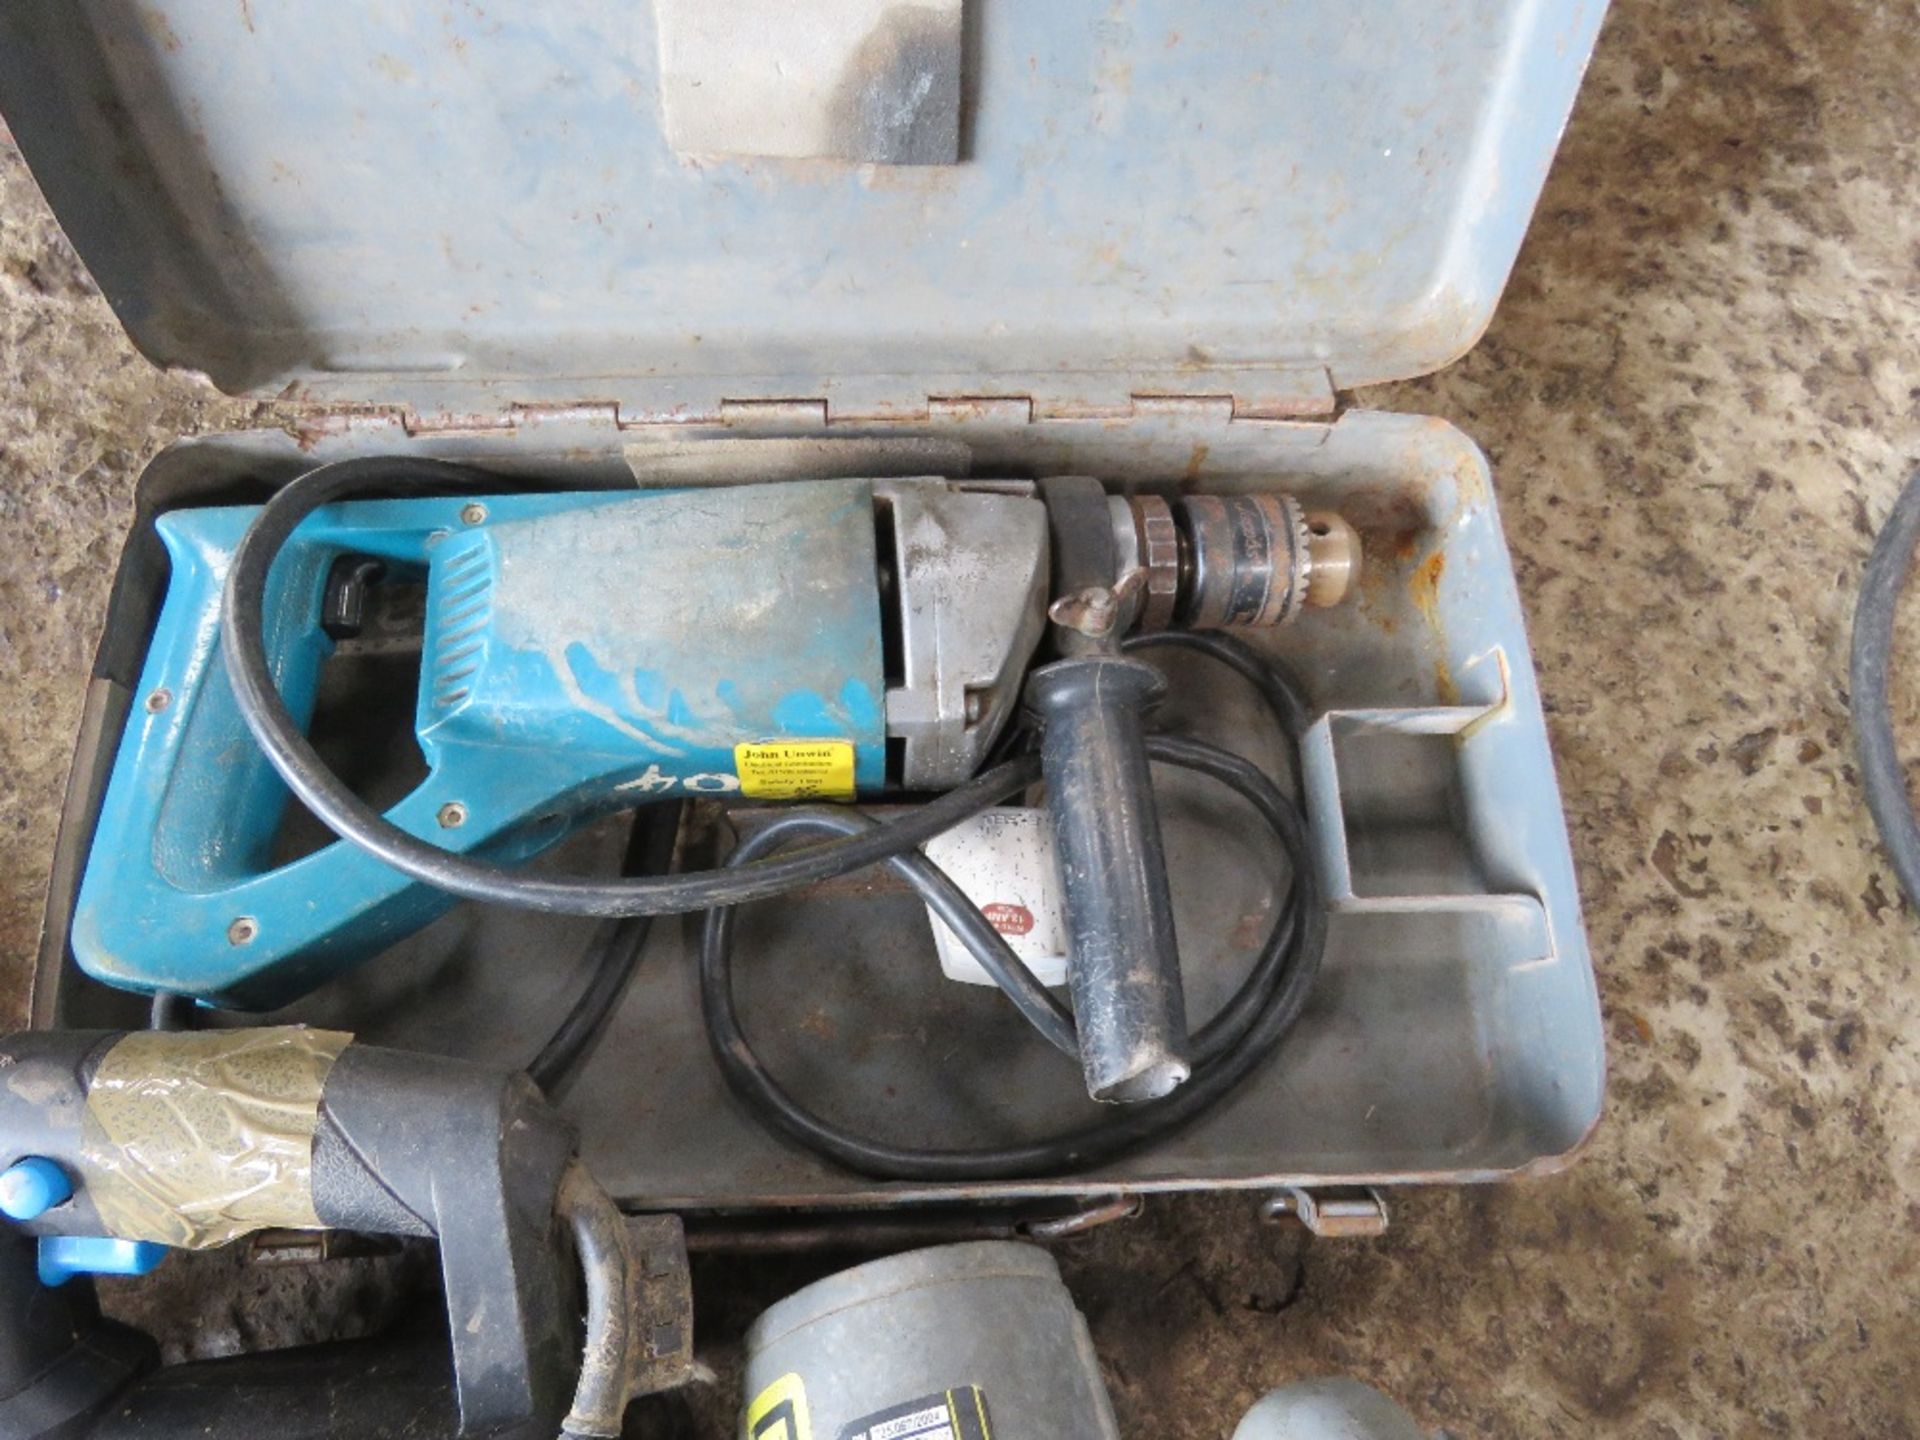 BATTERY TOOL CHARGERS PLUS 4NO 240VOLT POWER TOOLS.....THIS LOT IS SOLD UNDER THE AUCTIONEERS MARGIN - Image 4 of 4